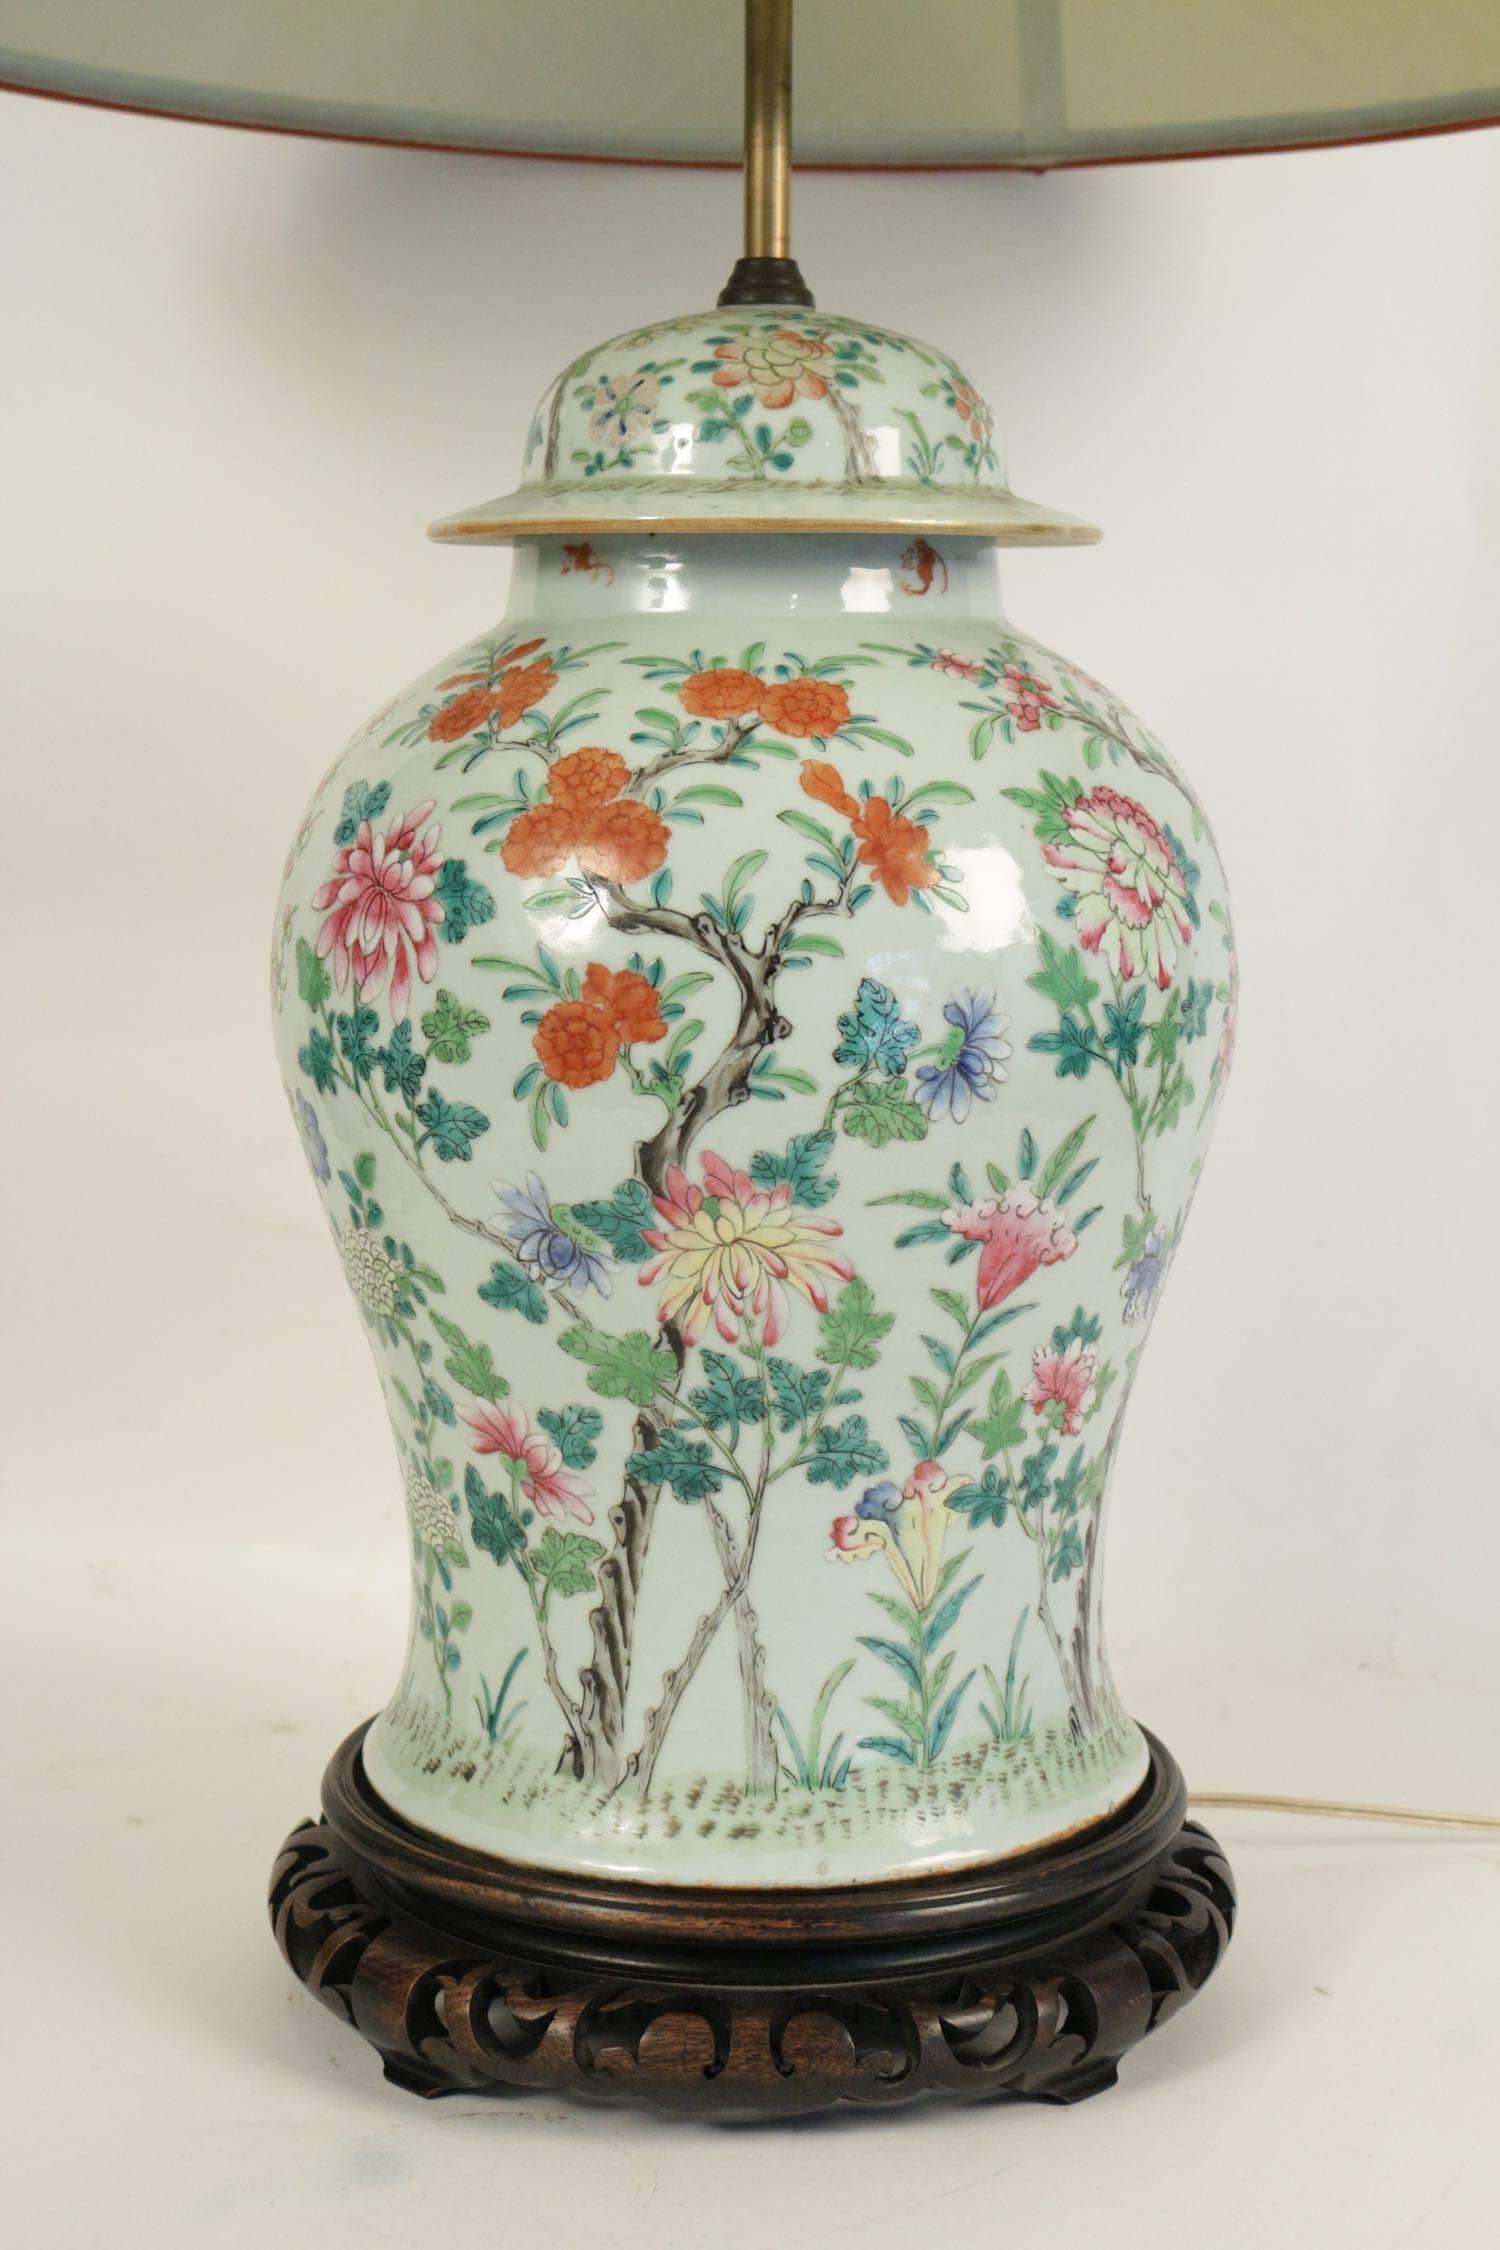 Chinese Export Important Chinese Porcelain Lamp, circa 1890-1900 